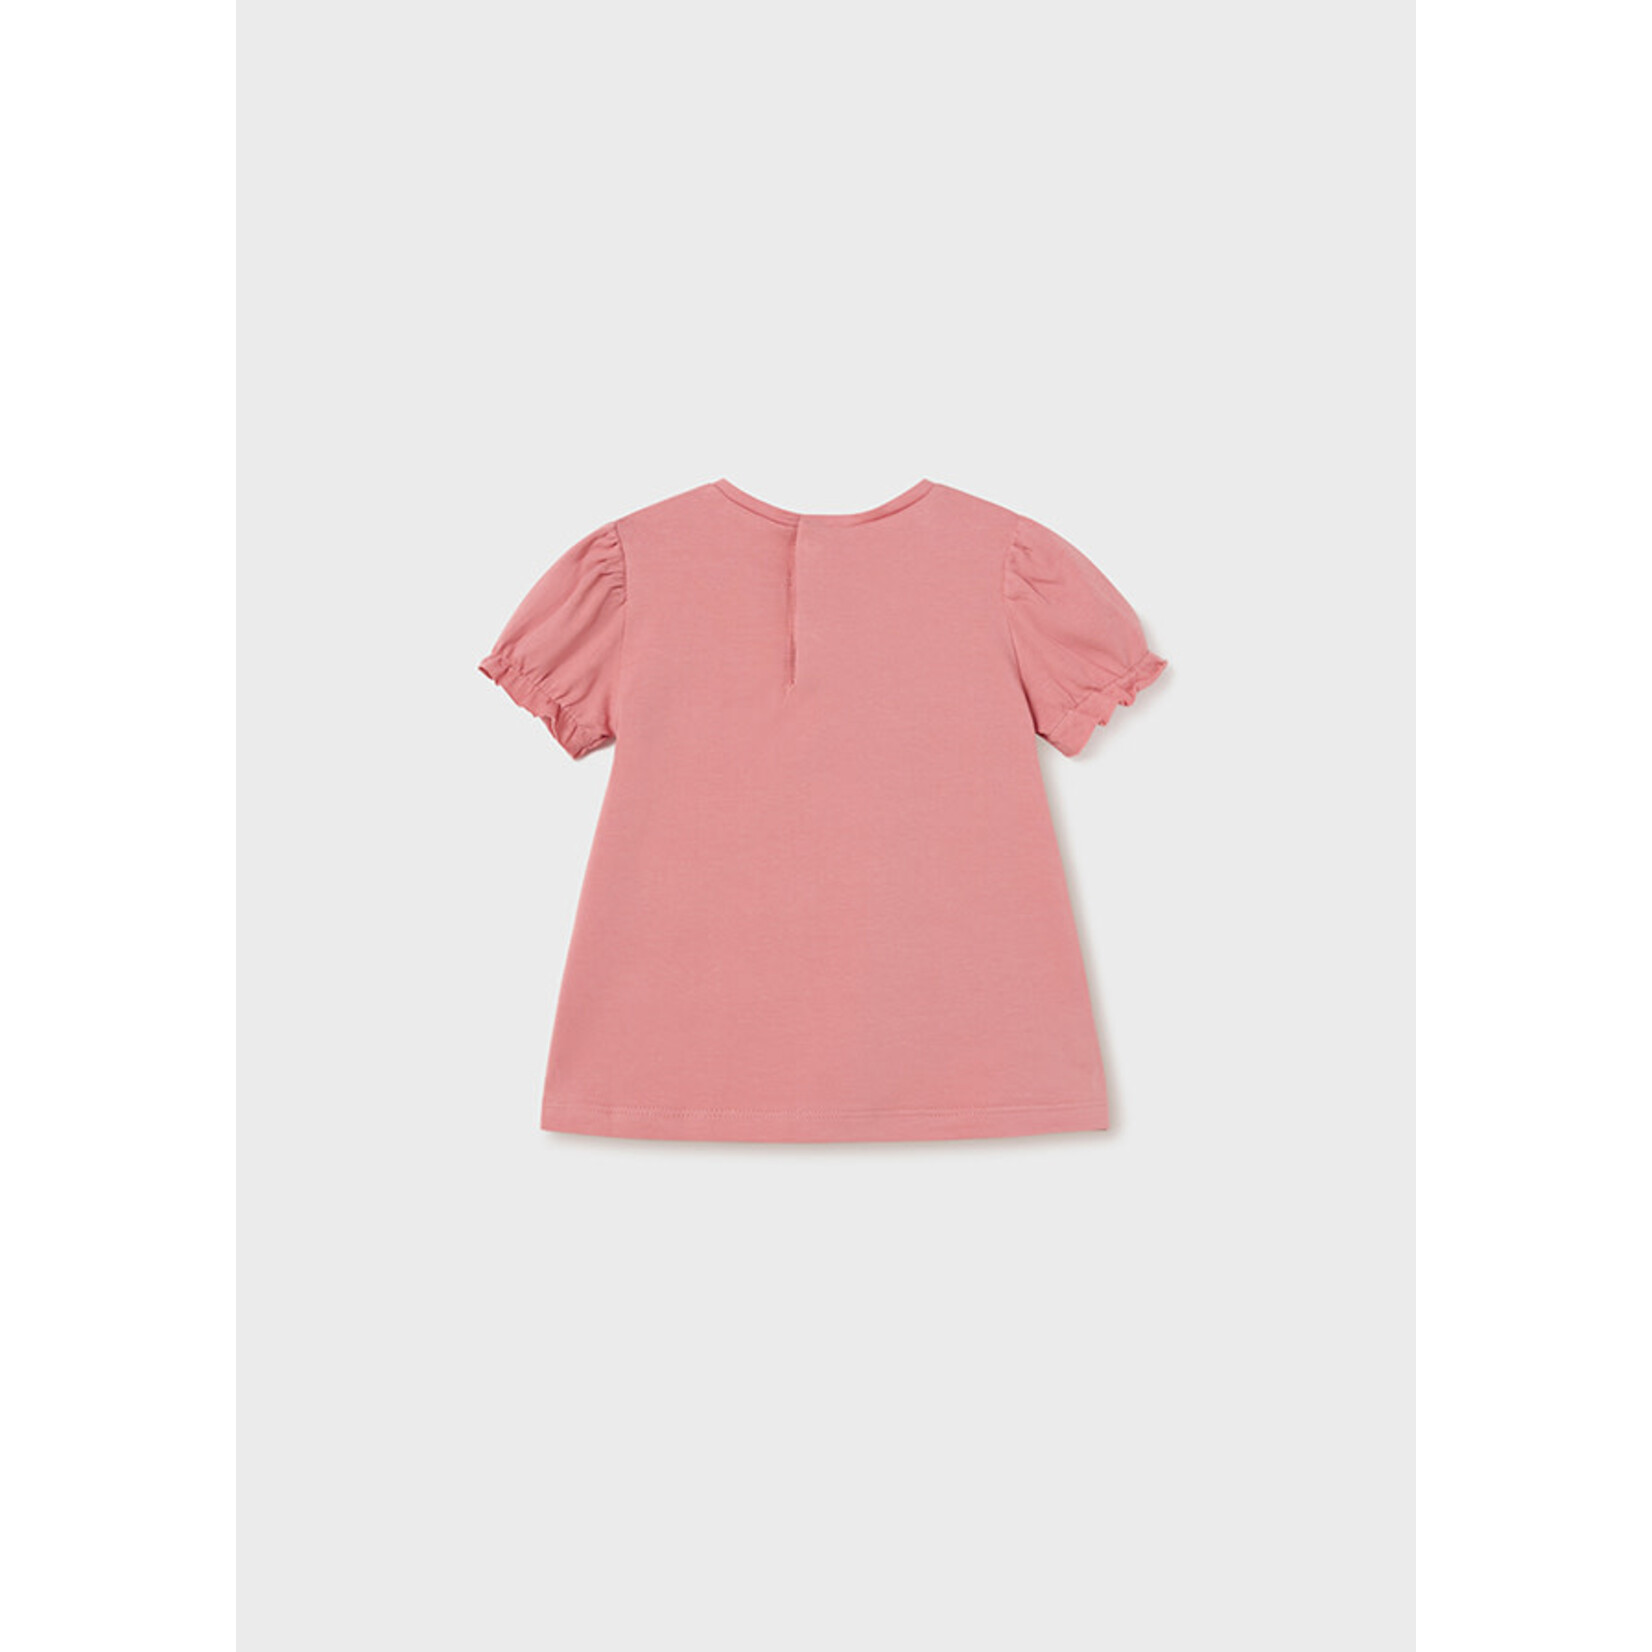 MAYORAL Scalloped Tee